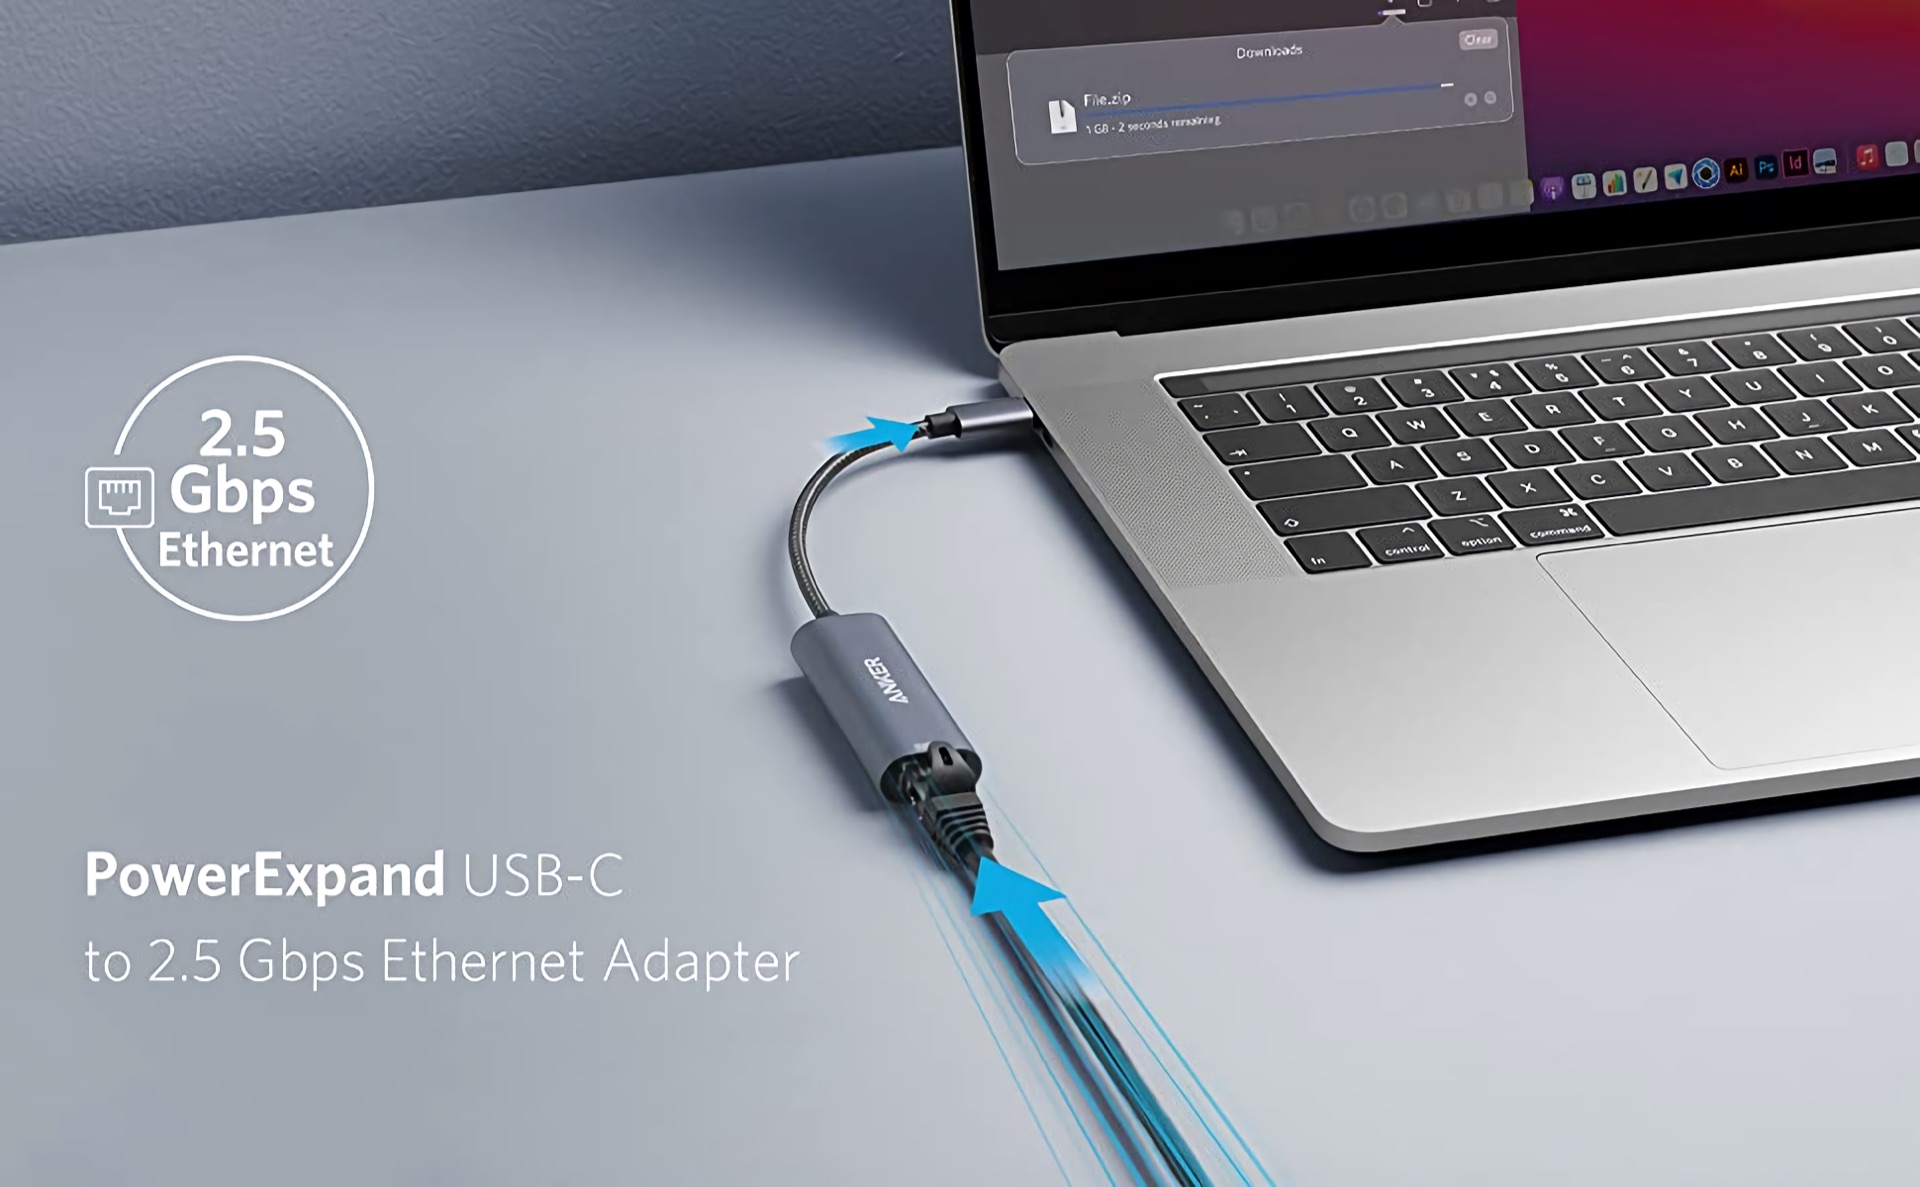 Anker PowerExpand USB-C to 2.5 Gbps Ethernet Adapter